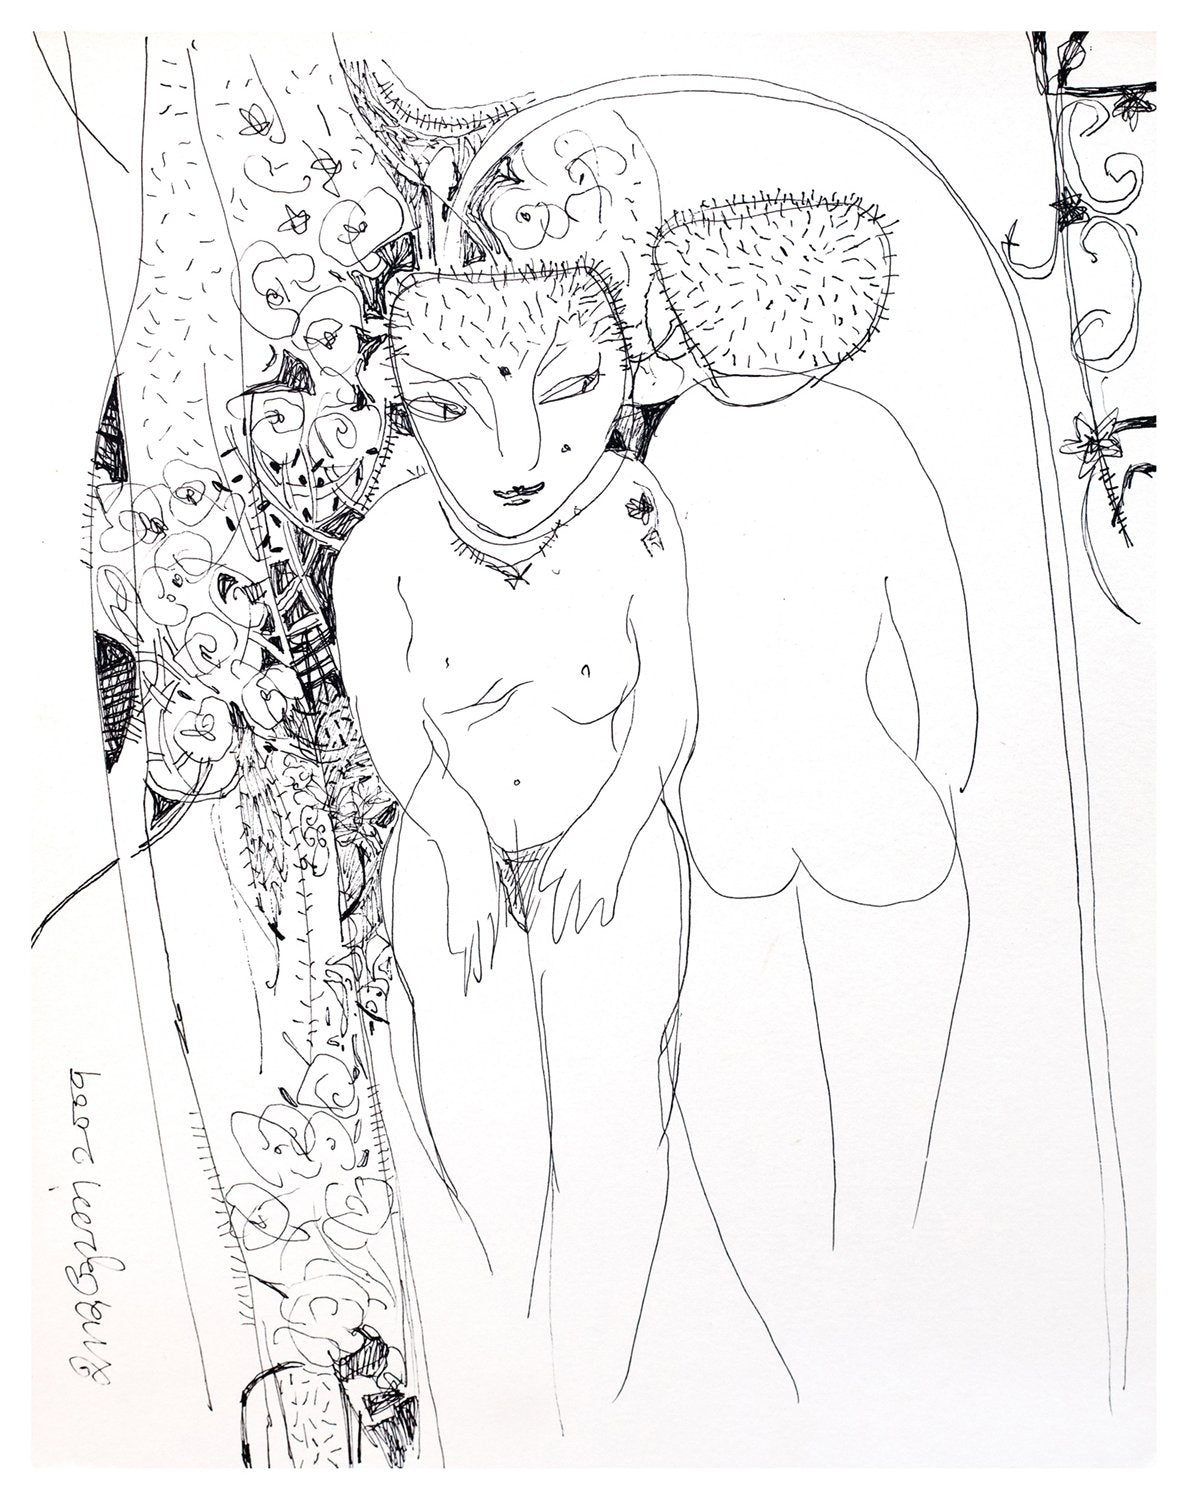 Beside of my Dream 15|A. Vasudevan- Pen and Ink on Board, 2013, 9 x 7.5 inches